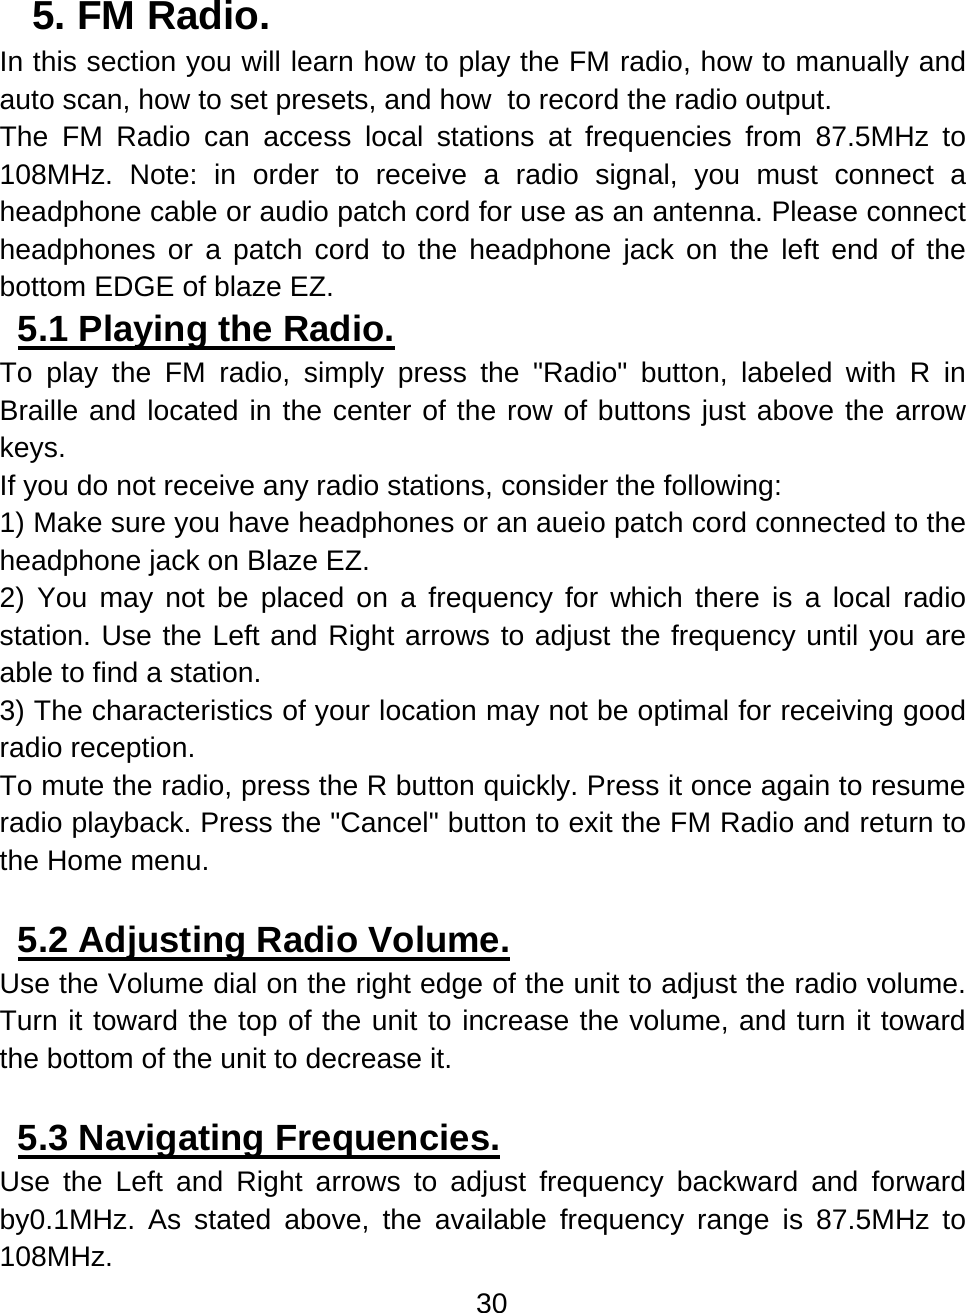 30  5. FM Radio.  In this section you will learn how to play the FM radio, how to manually and auto scan, how to set presets, and how  to record the radio output. The FM Radio can access local stations at frequencies from 87.5MHz to 108MHz. Note: in order to receive a radio signal, you must connect a headphone cable or audio patch cord for use as an antenna. Please connect headphones or a patch cord to the headphone jack on the left end of the bottom EDGE of blaze EZ.  5.1 Playing the Radio.  To play the FM radio, simply press the &quot;Radio&quot; button, labeled with R in Braille and located in the center of the row of buttons just above the arrow keys.  If you do not receive any radio stations, consider the following: 1) Make sure you have headphones or an aueio patch cord connected to the headphone jack on Blaze EZ. 2) You may not be placed on a frequency for which there is a local radio station. Use the Left and Right arrows to adjust the frequency until you are able to find a station. 3) The characteristics of your location may not be optimal for receiving good radio reception. To mute the radio, press the R button quickly. Press it once again to resume radio playback. Press the &quot;Cancel&quot; button to exit the FM Radio and return to the Home menu.  5.2 Adjusting Radio Volume.  Use the Volume dial on the right edge of the unit to adjust the radio volume. Turn it toward the top of the unit to increase the volume, and turn it toward the bottom of the unit to decrease it.  5.3 Navigating Frequencies.  Use the Left and Right arrows to adjust frequency backward and forward by0.1MHz. As stated above, the available frequency range is 87.5MHz to 108MHz.  